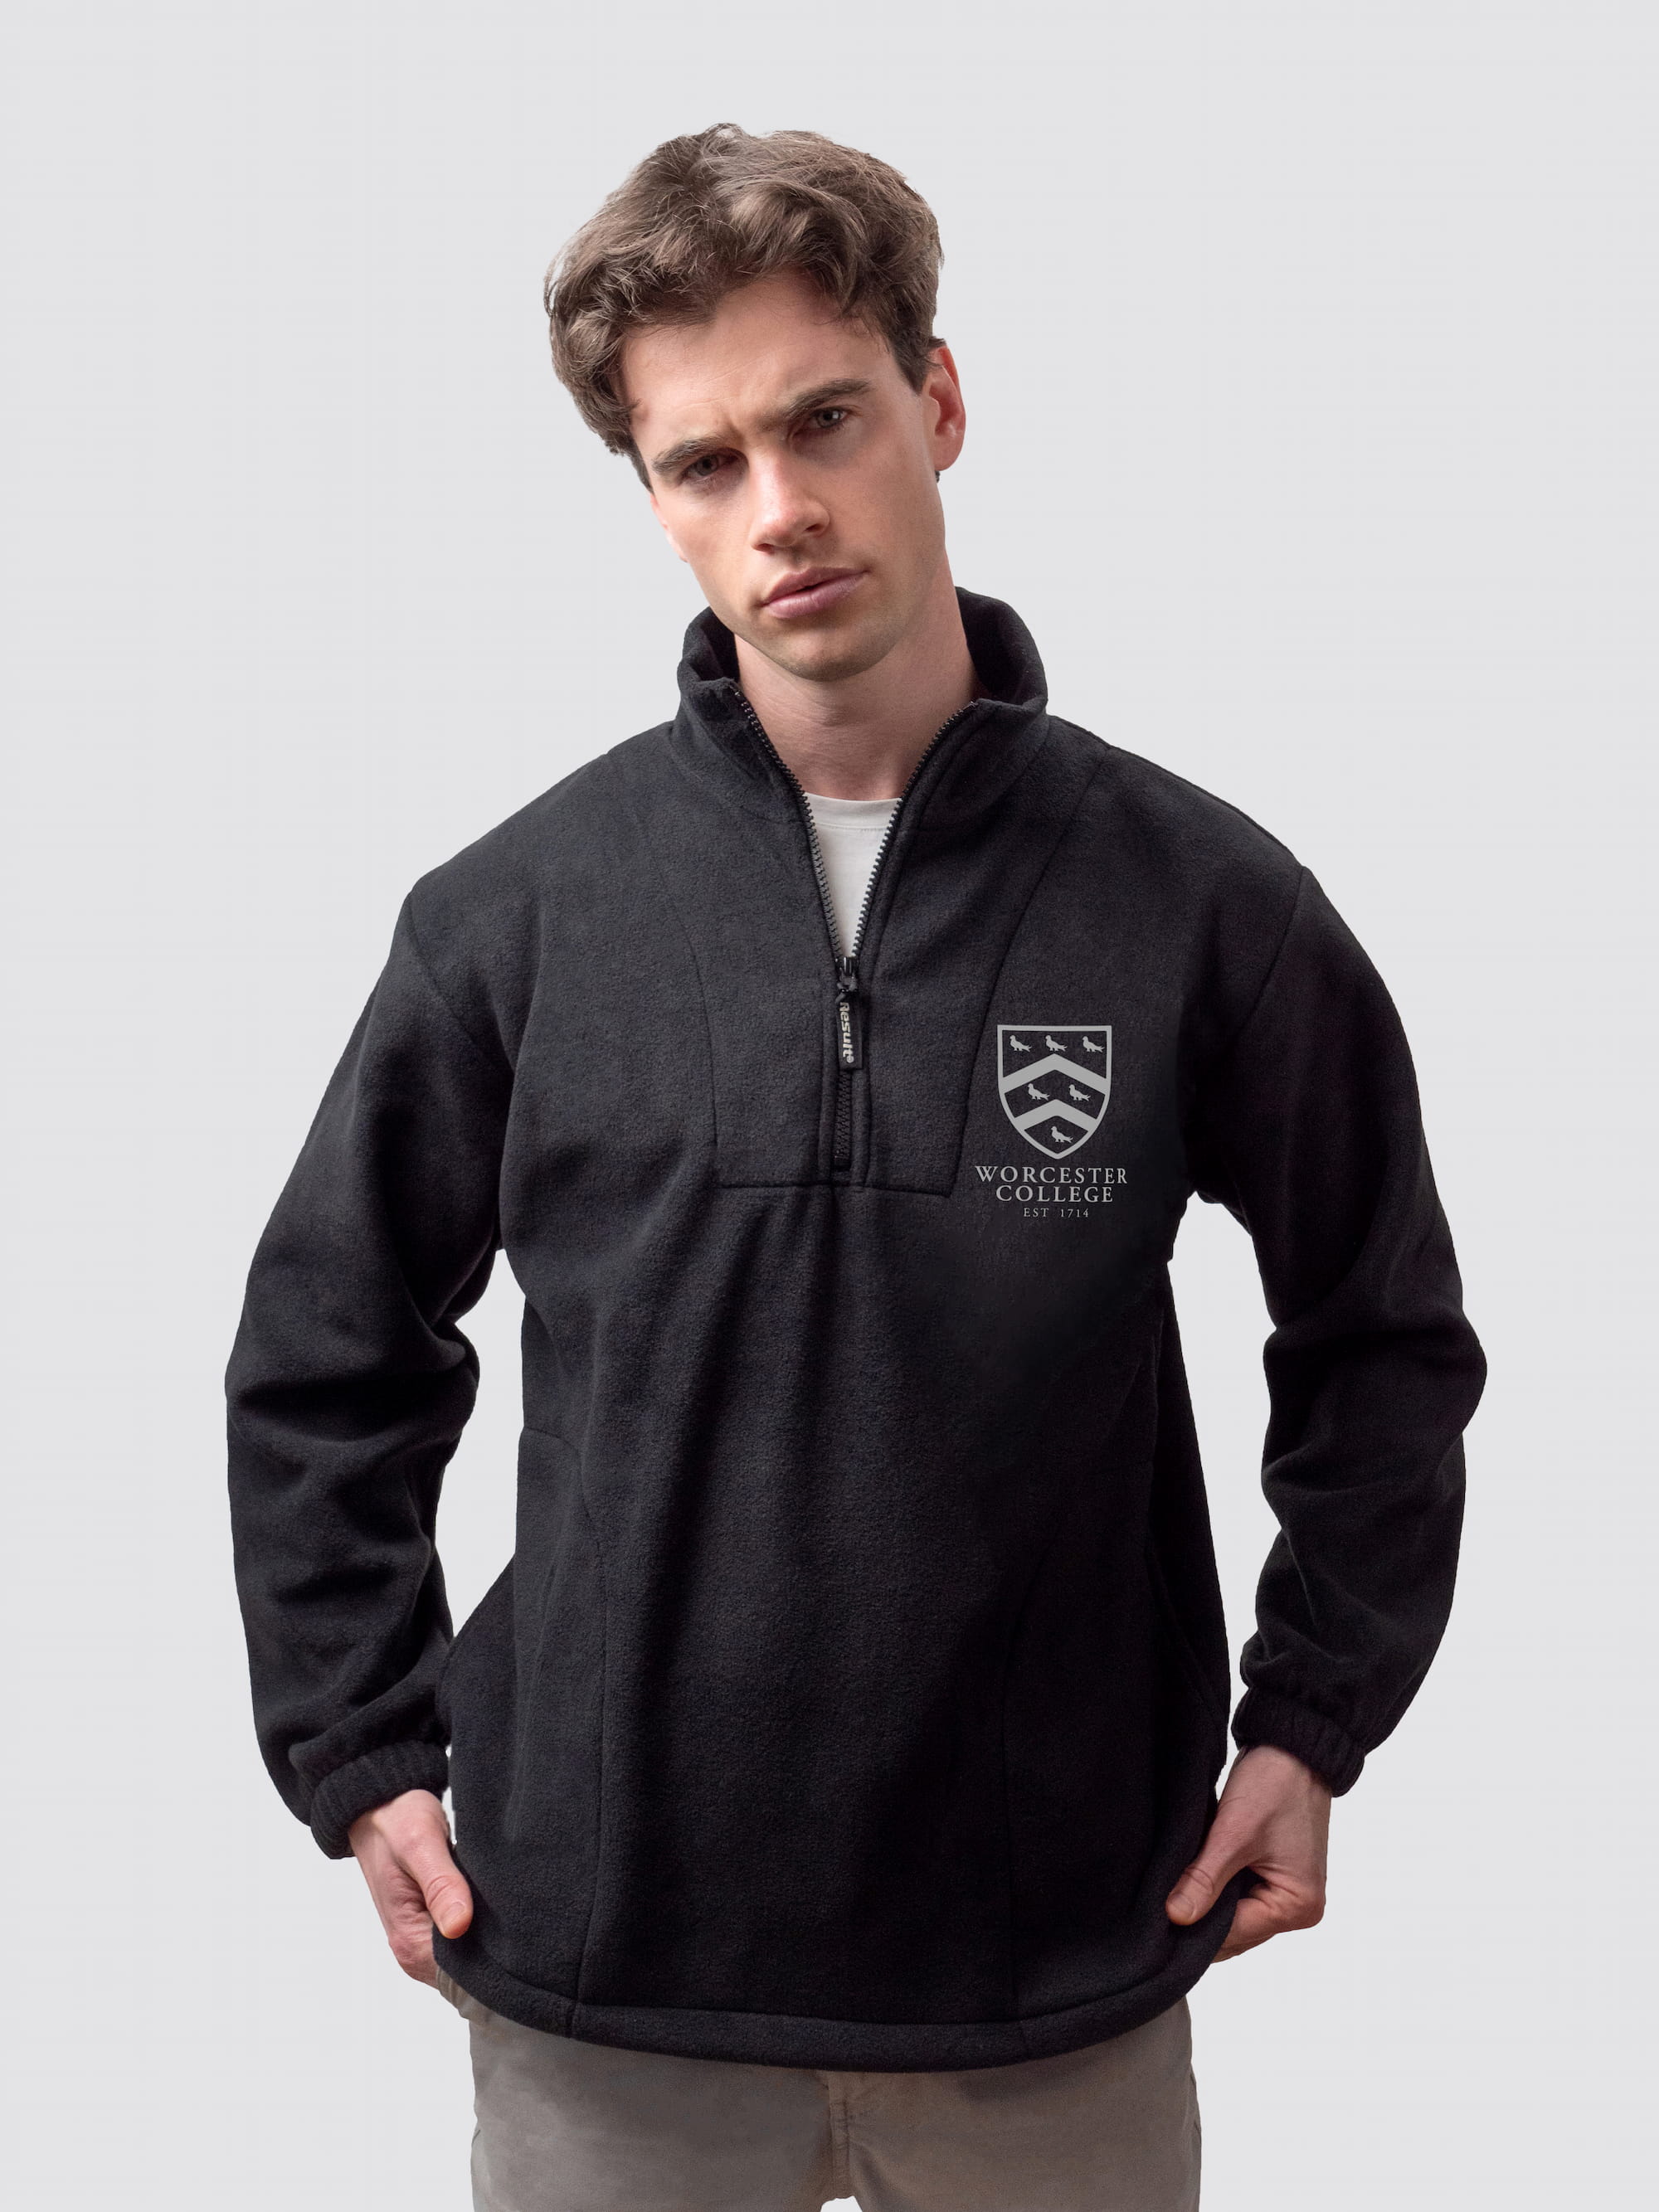 Oxford university fleece, with custom embroidered initials and Worcester crest